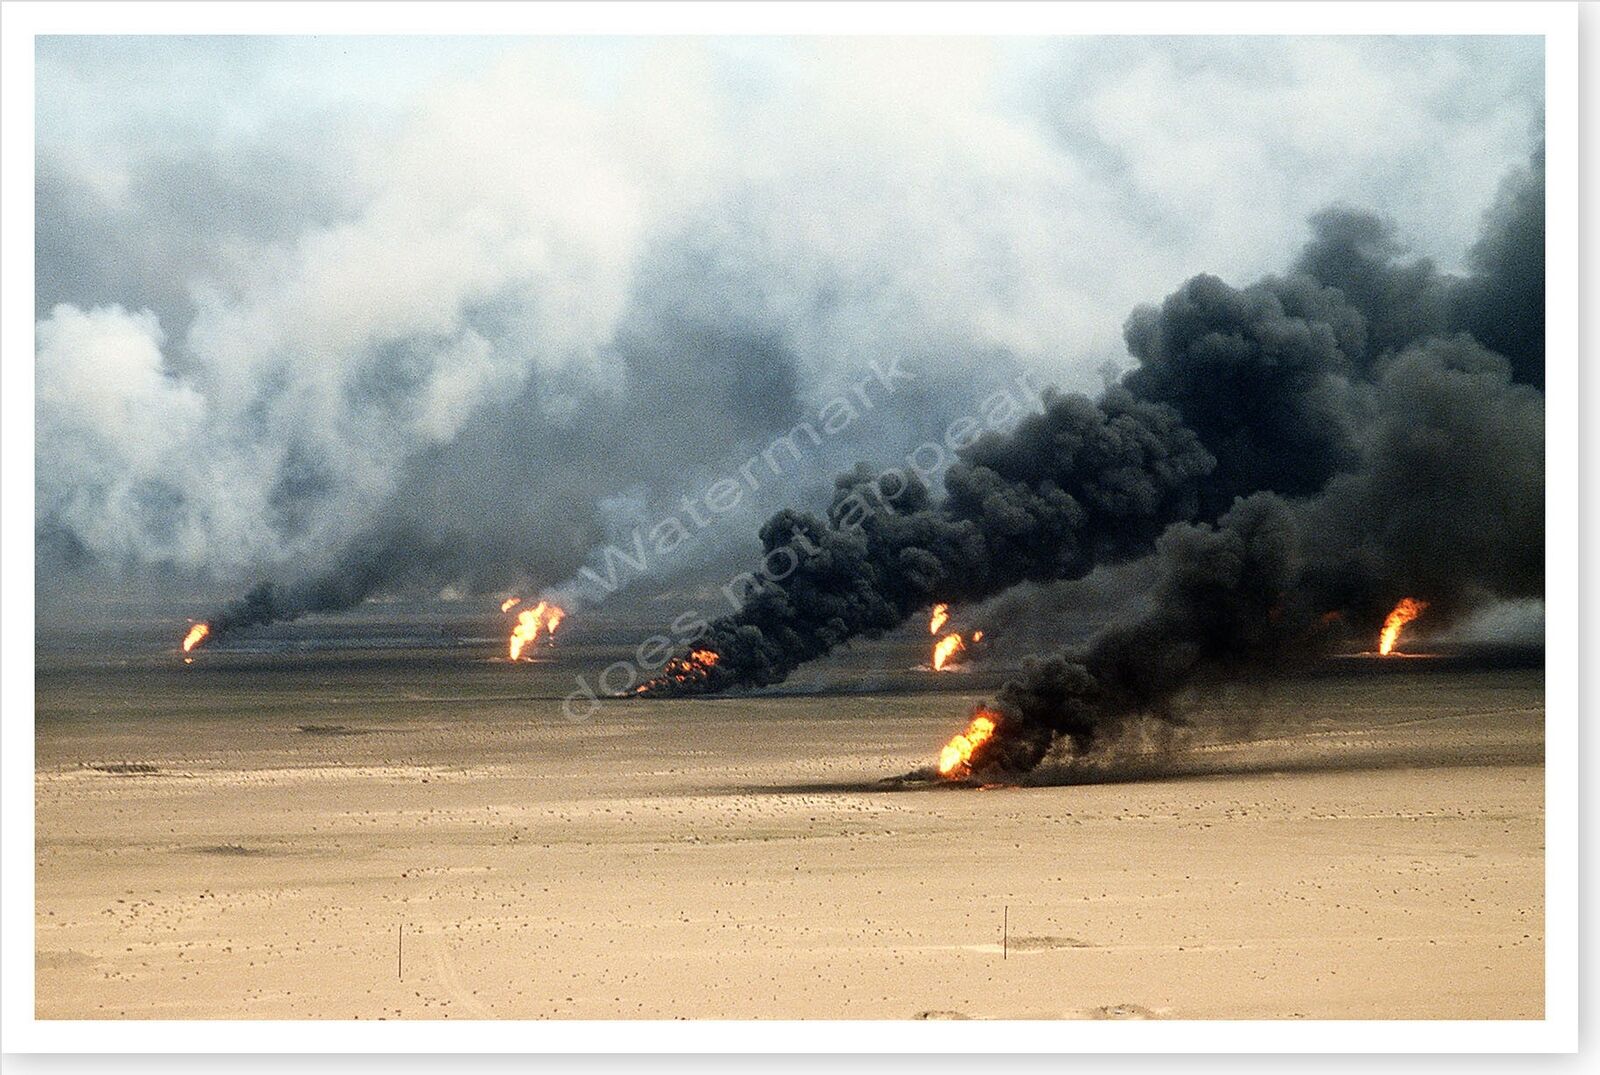 Raging Oil Fires Outside Kuwait City In Aftermath Of Desert Storm 8 x 12 Photo